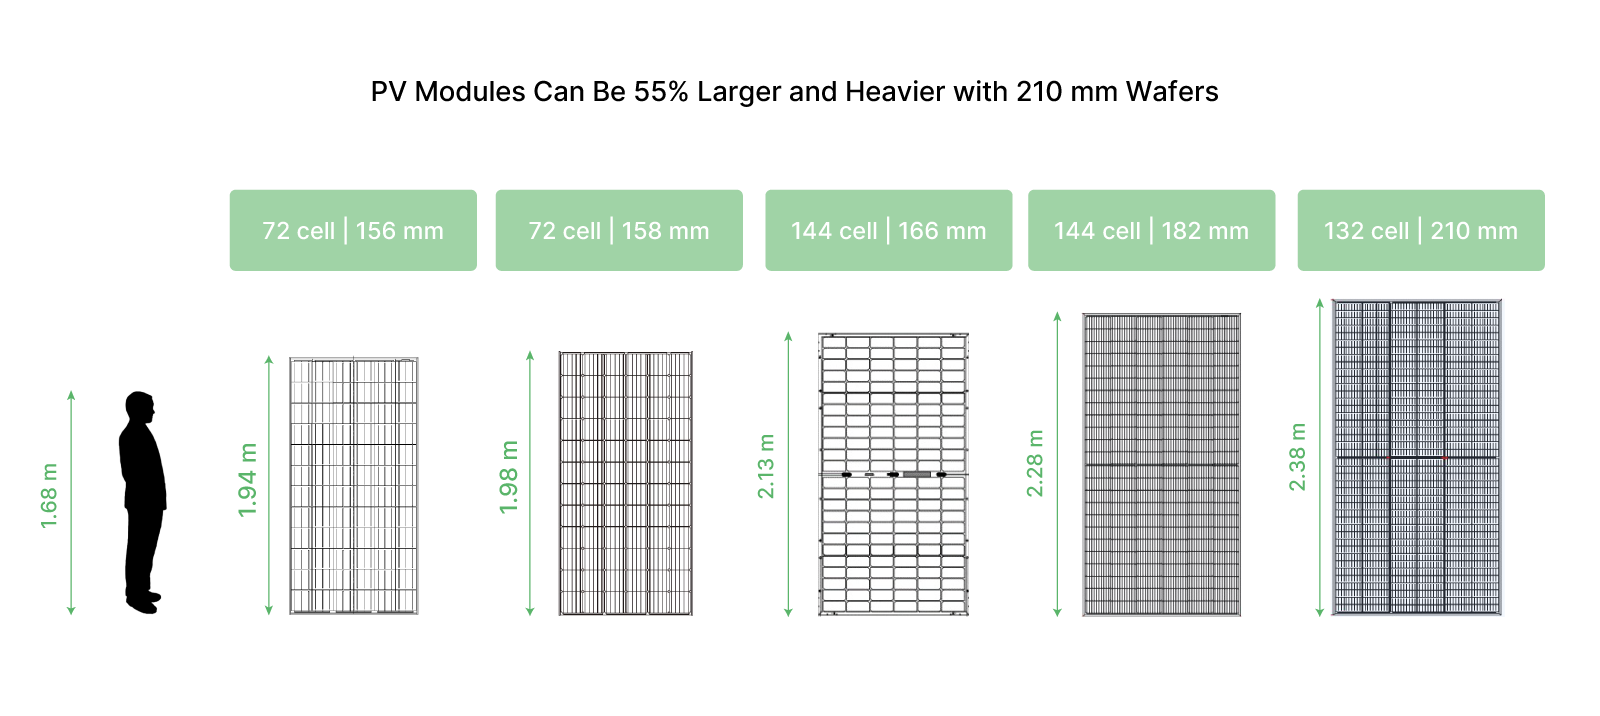 Graphic: size comparison of pv modules by number of cells